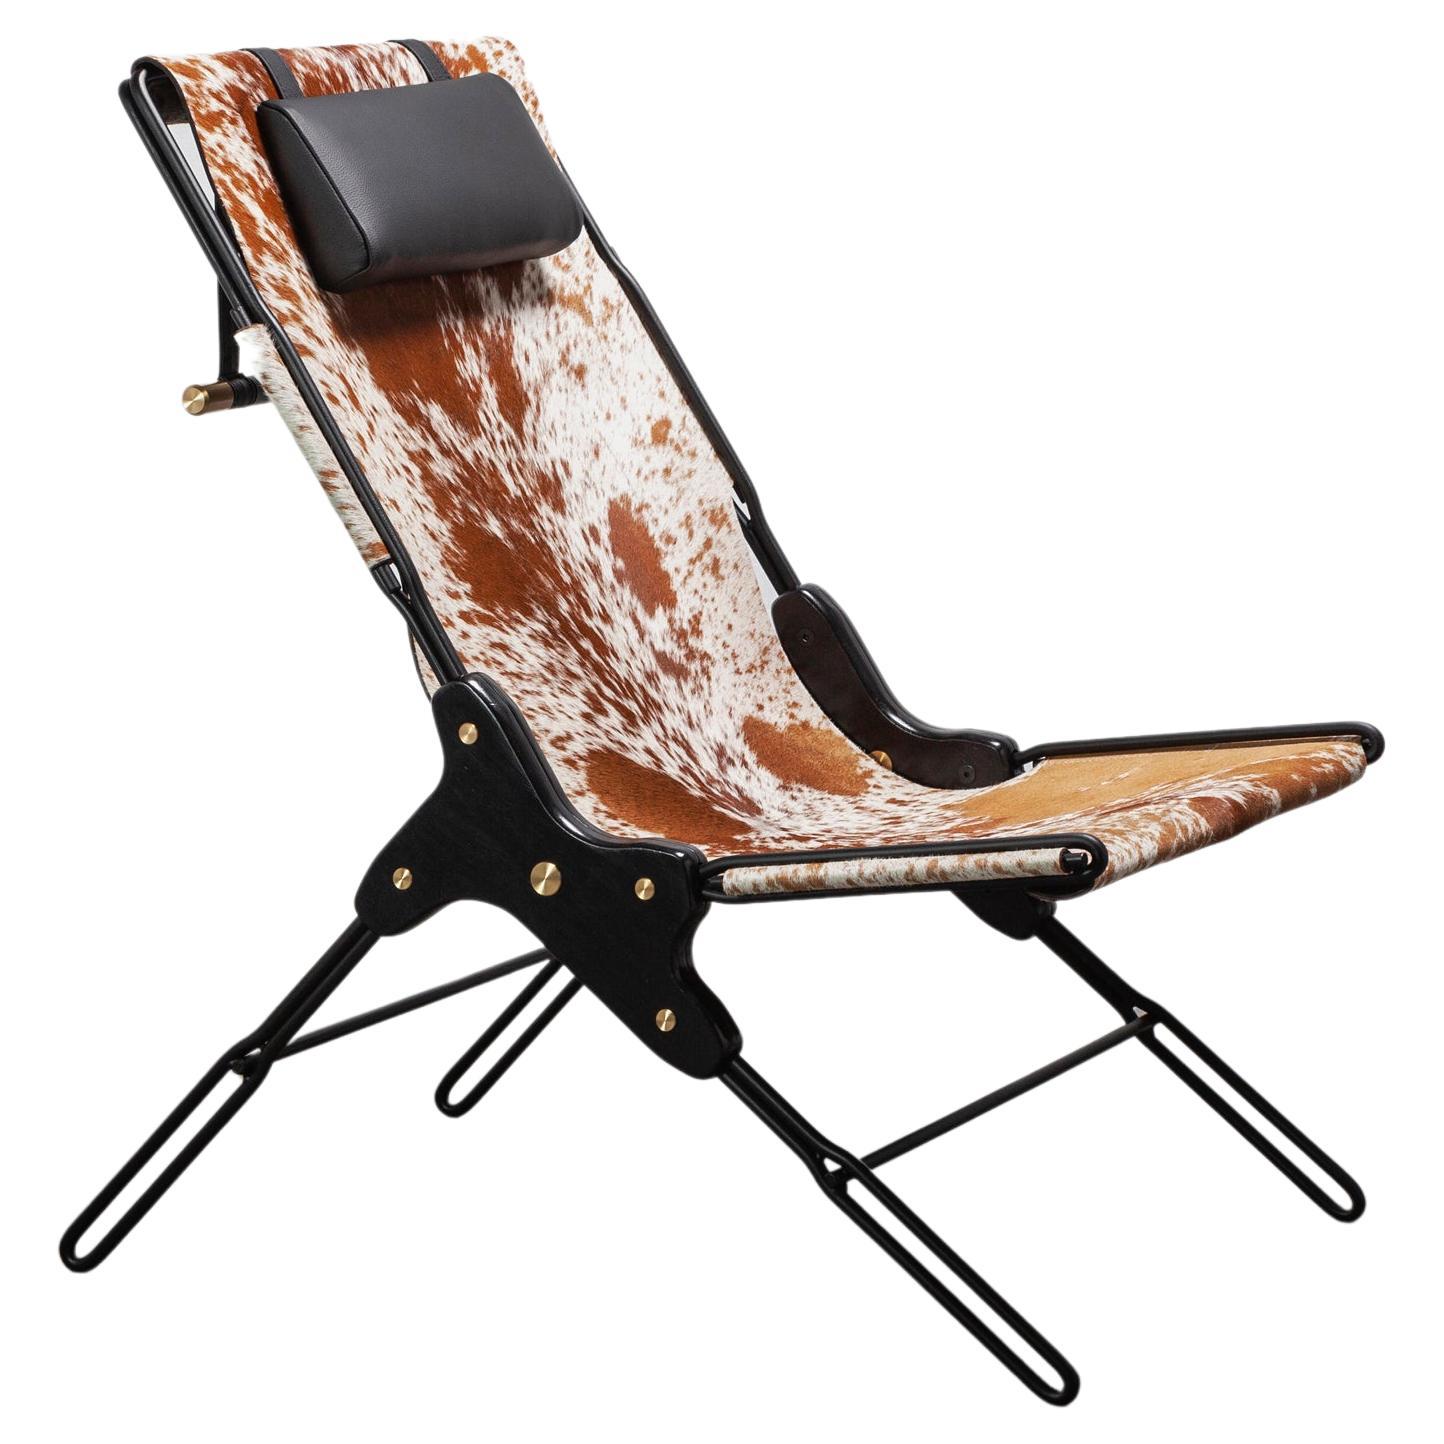 PERFIDIA_01 Pony Hair Leather Sling Lounge Chair in Black Steel by ANDEAN